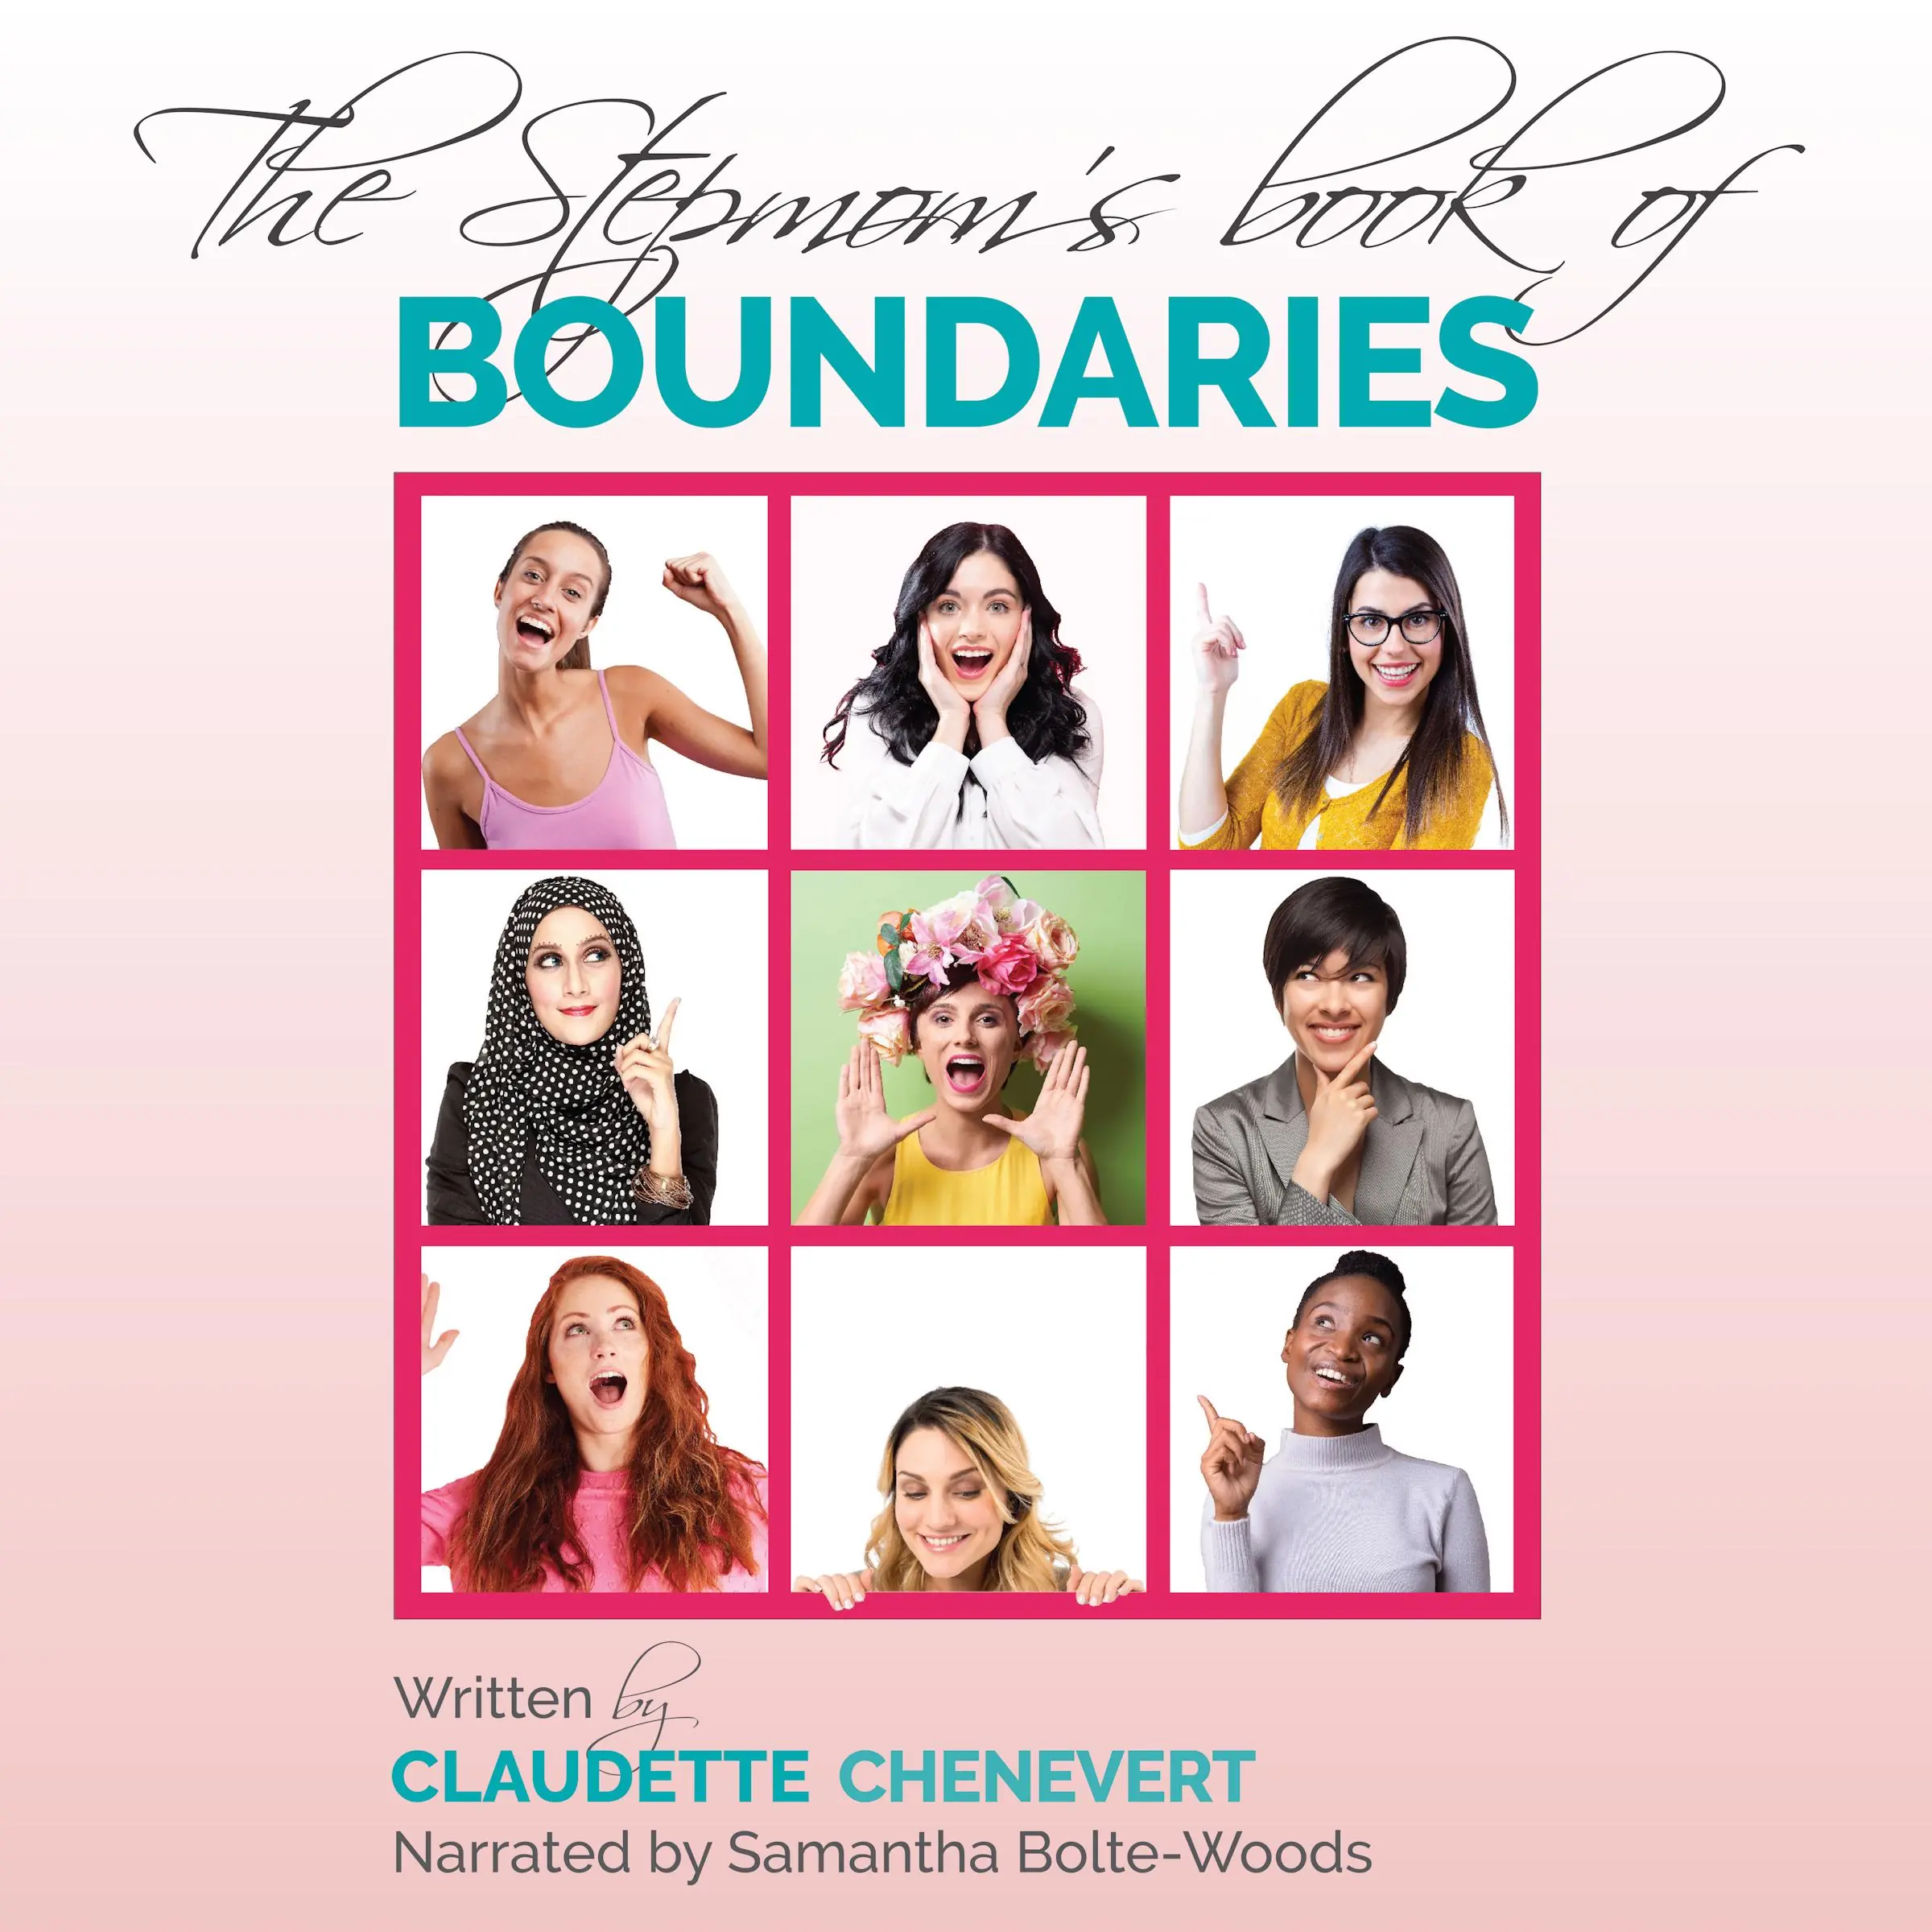 The Stepmom's Book of Boundaries Audiobook by Claudette Chenevert